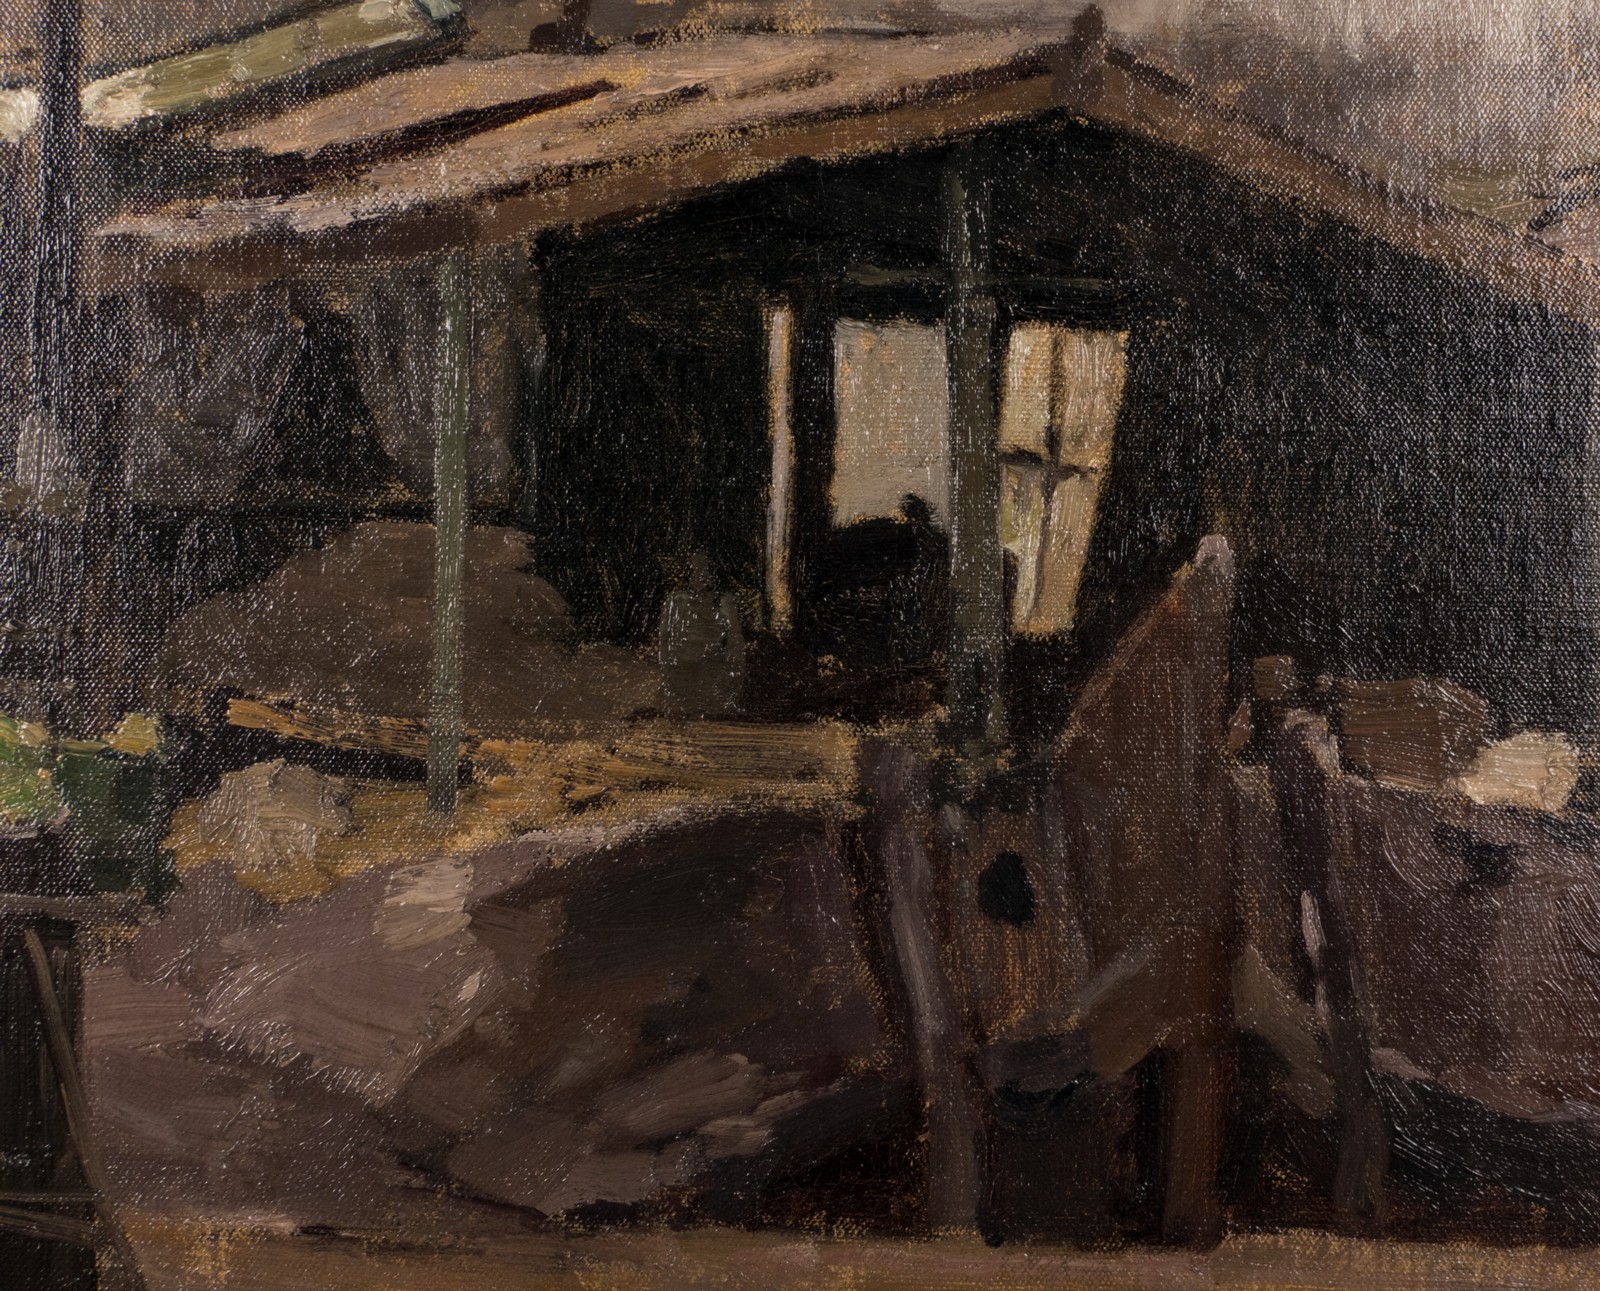 Apol A., view on a slum, oil on canvas, 100 x 120 cm - Image 5 of 7